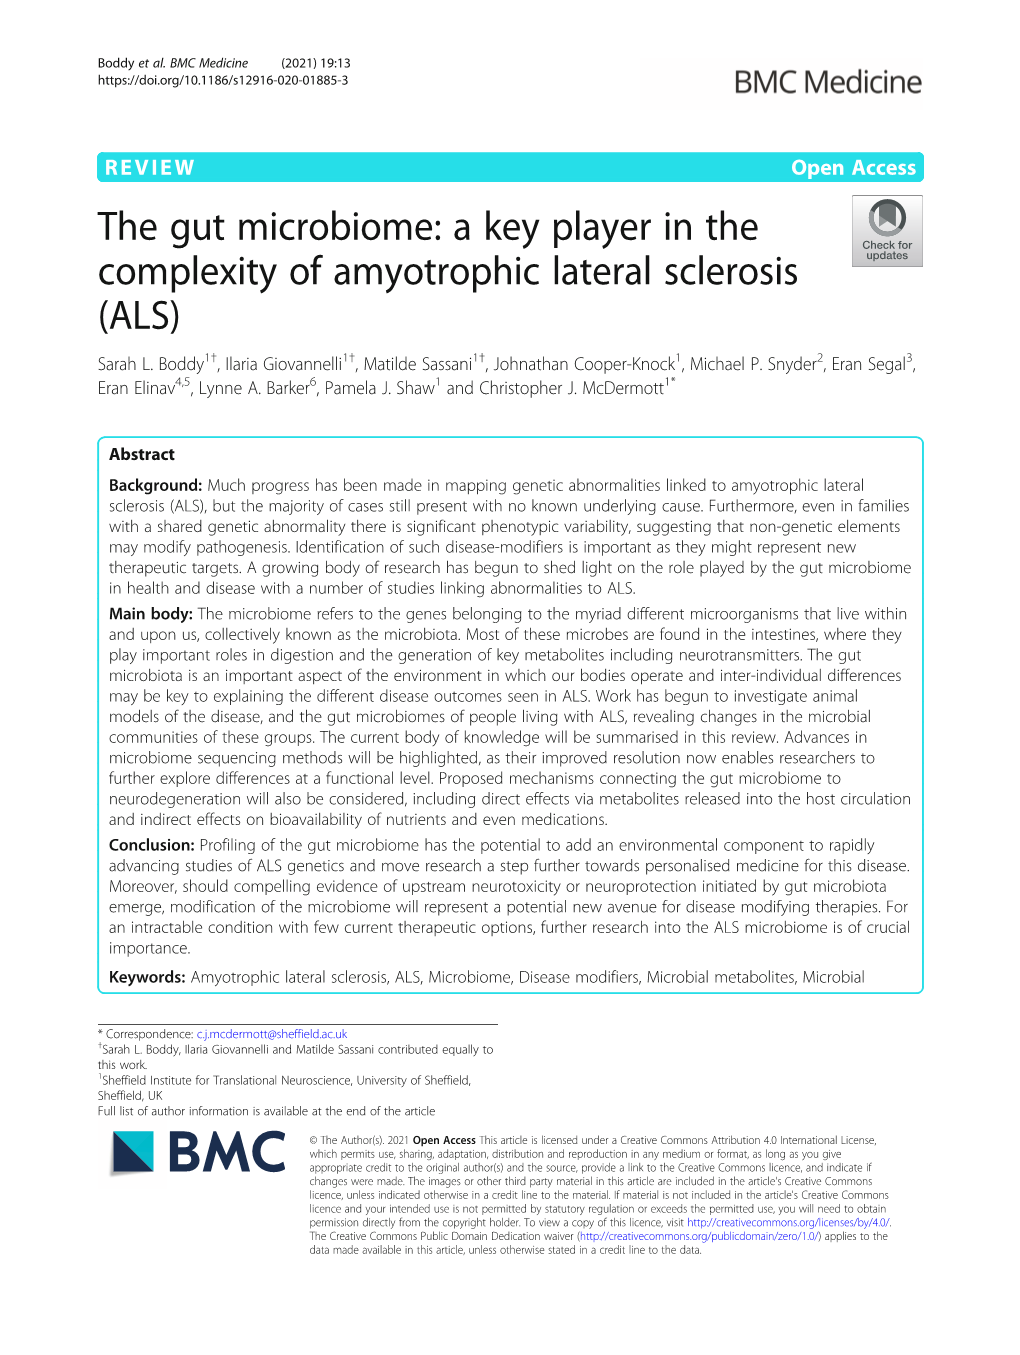 The Gut Microbiome: a Key Player in the Complexity of Amyotrophic Lateral Sclerosis (ALS) Sarah L